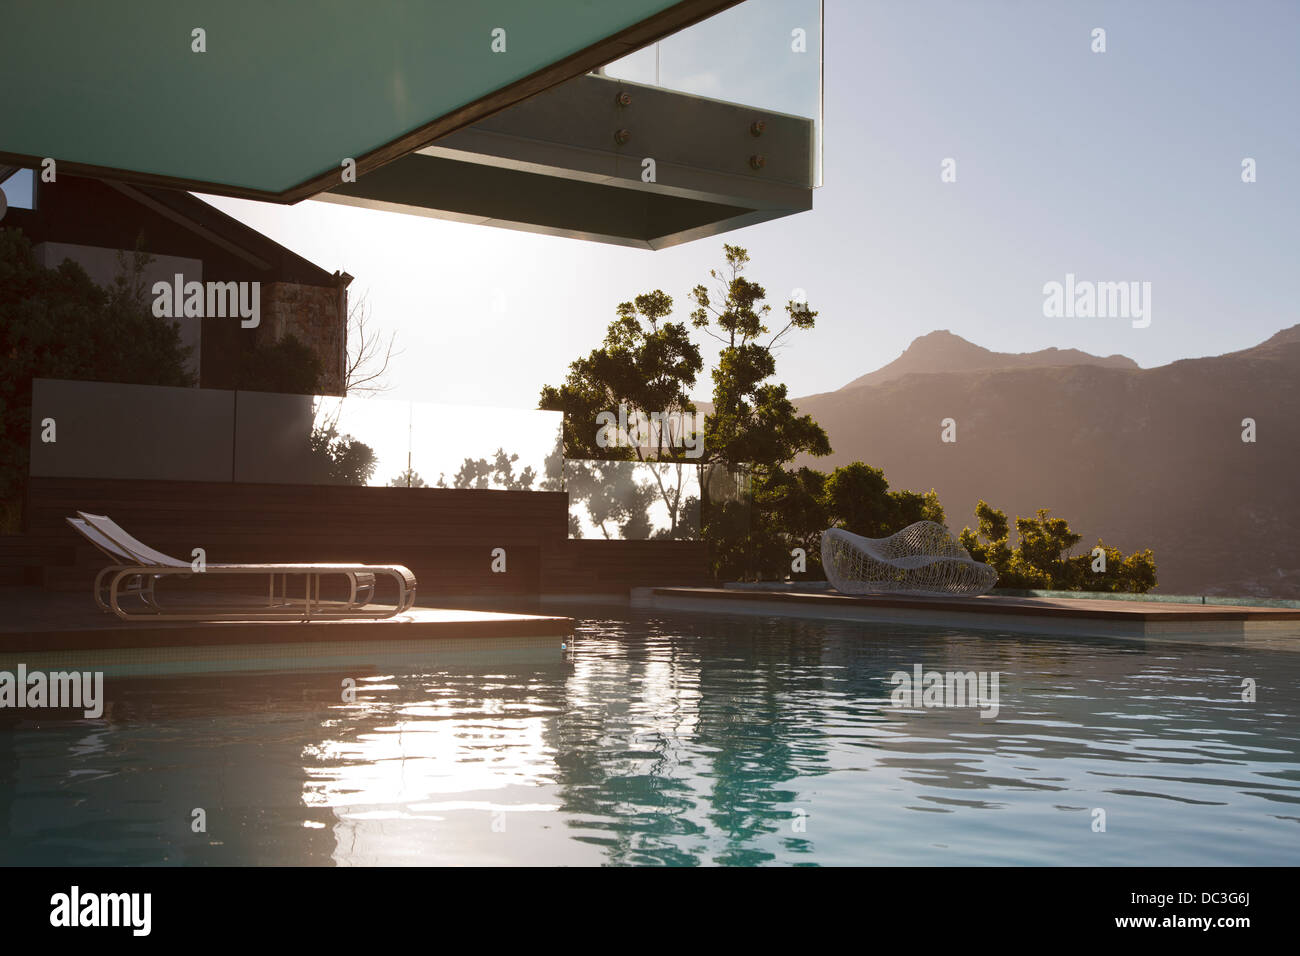 Luxury swimming pool with mountain view Stock Photo